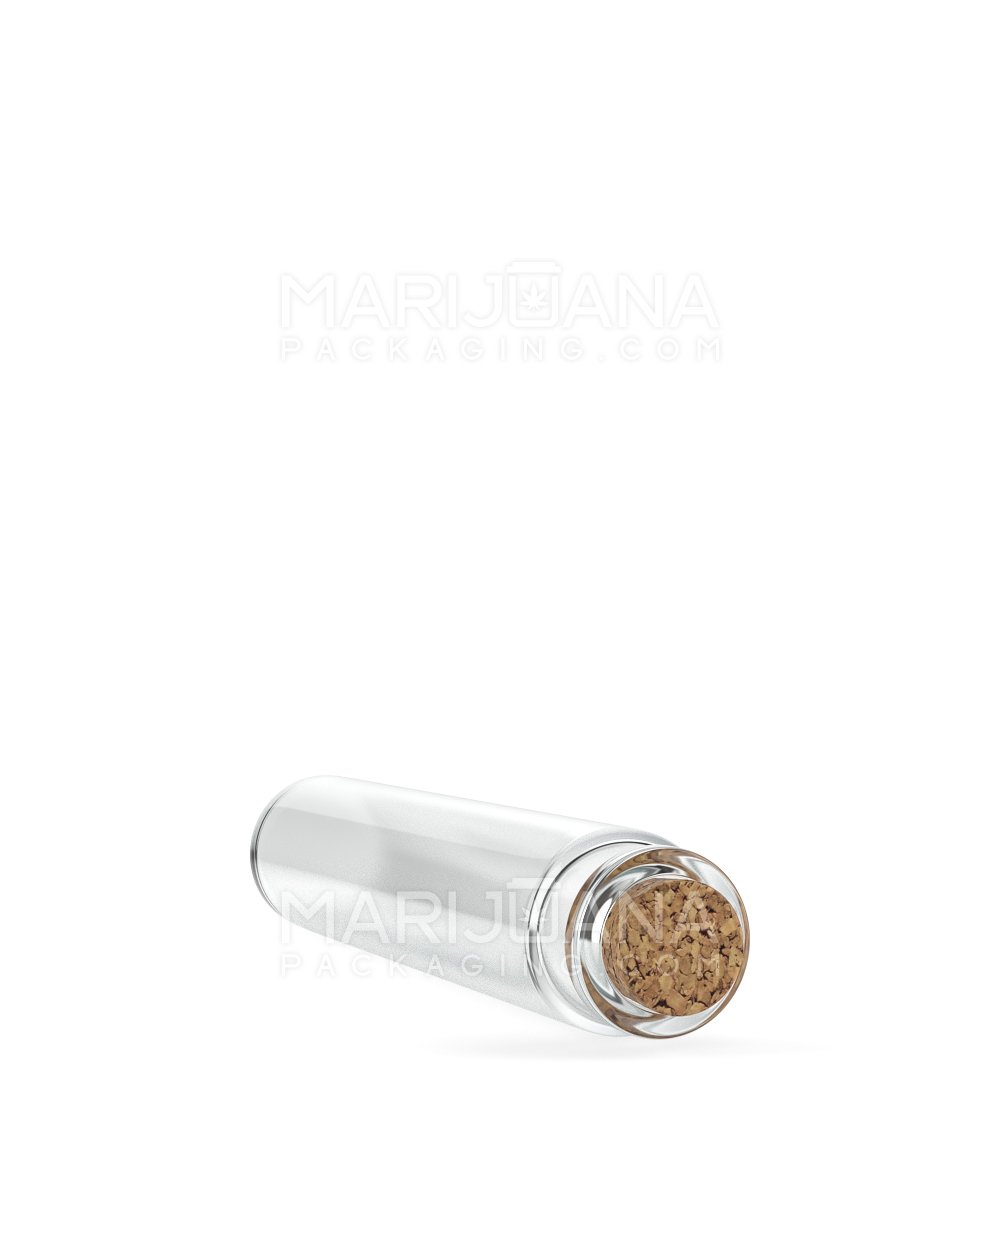 Glass Pre-Roll Tube with Cork Top | 120mm - Clear Glass - 586 Count - 7